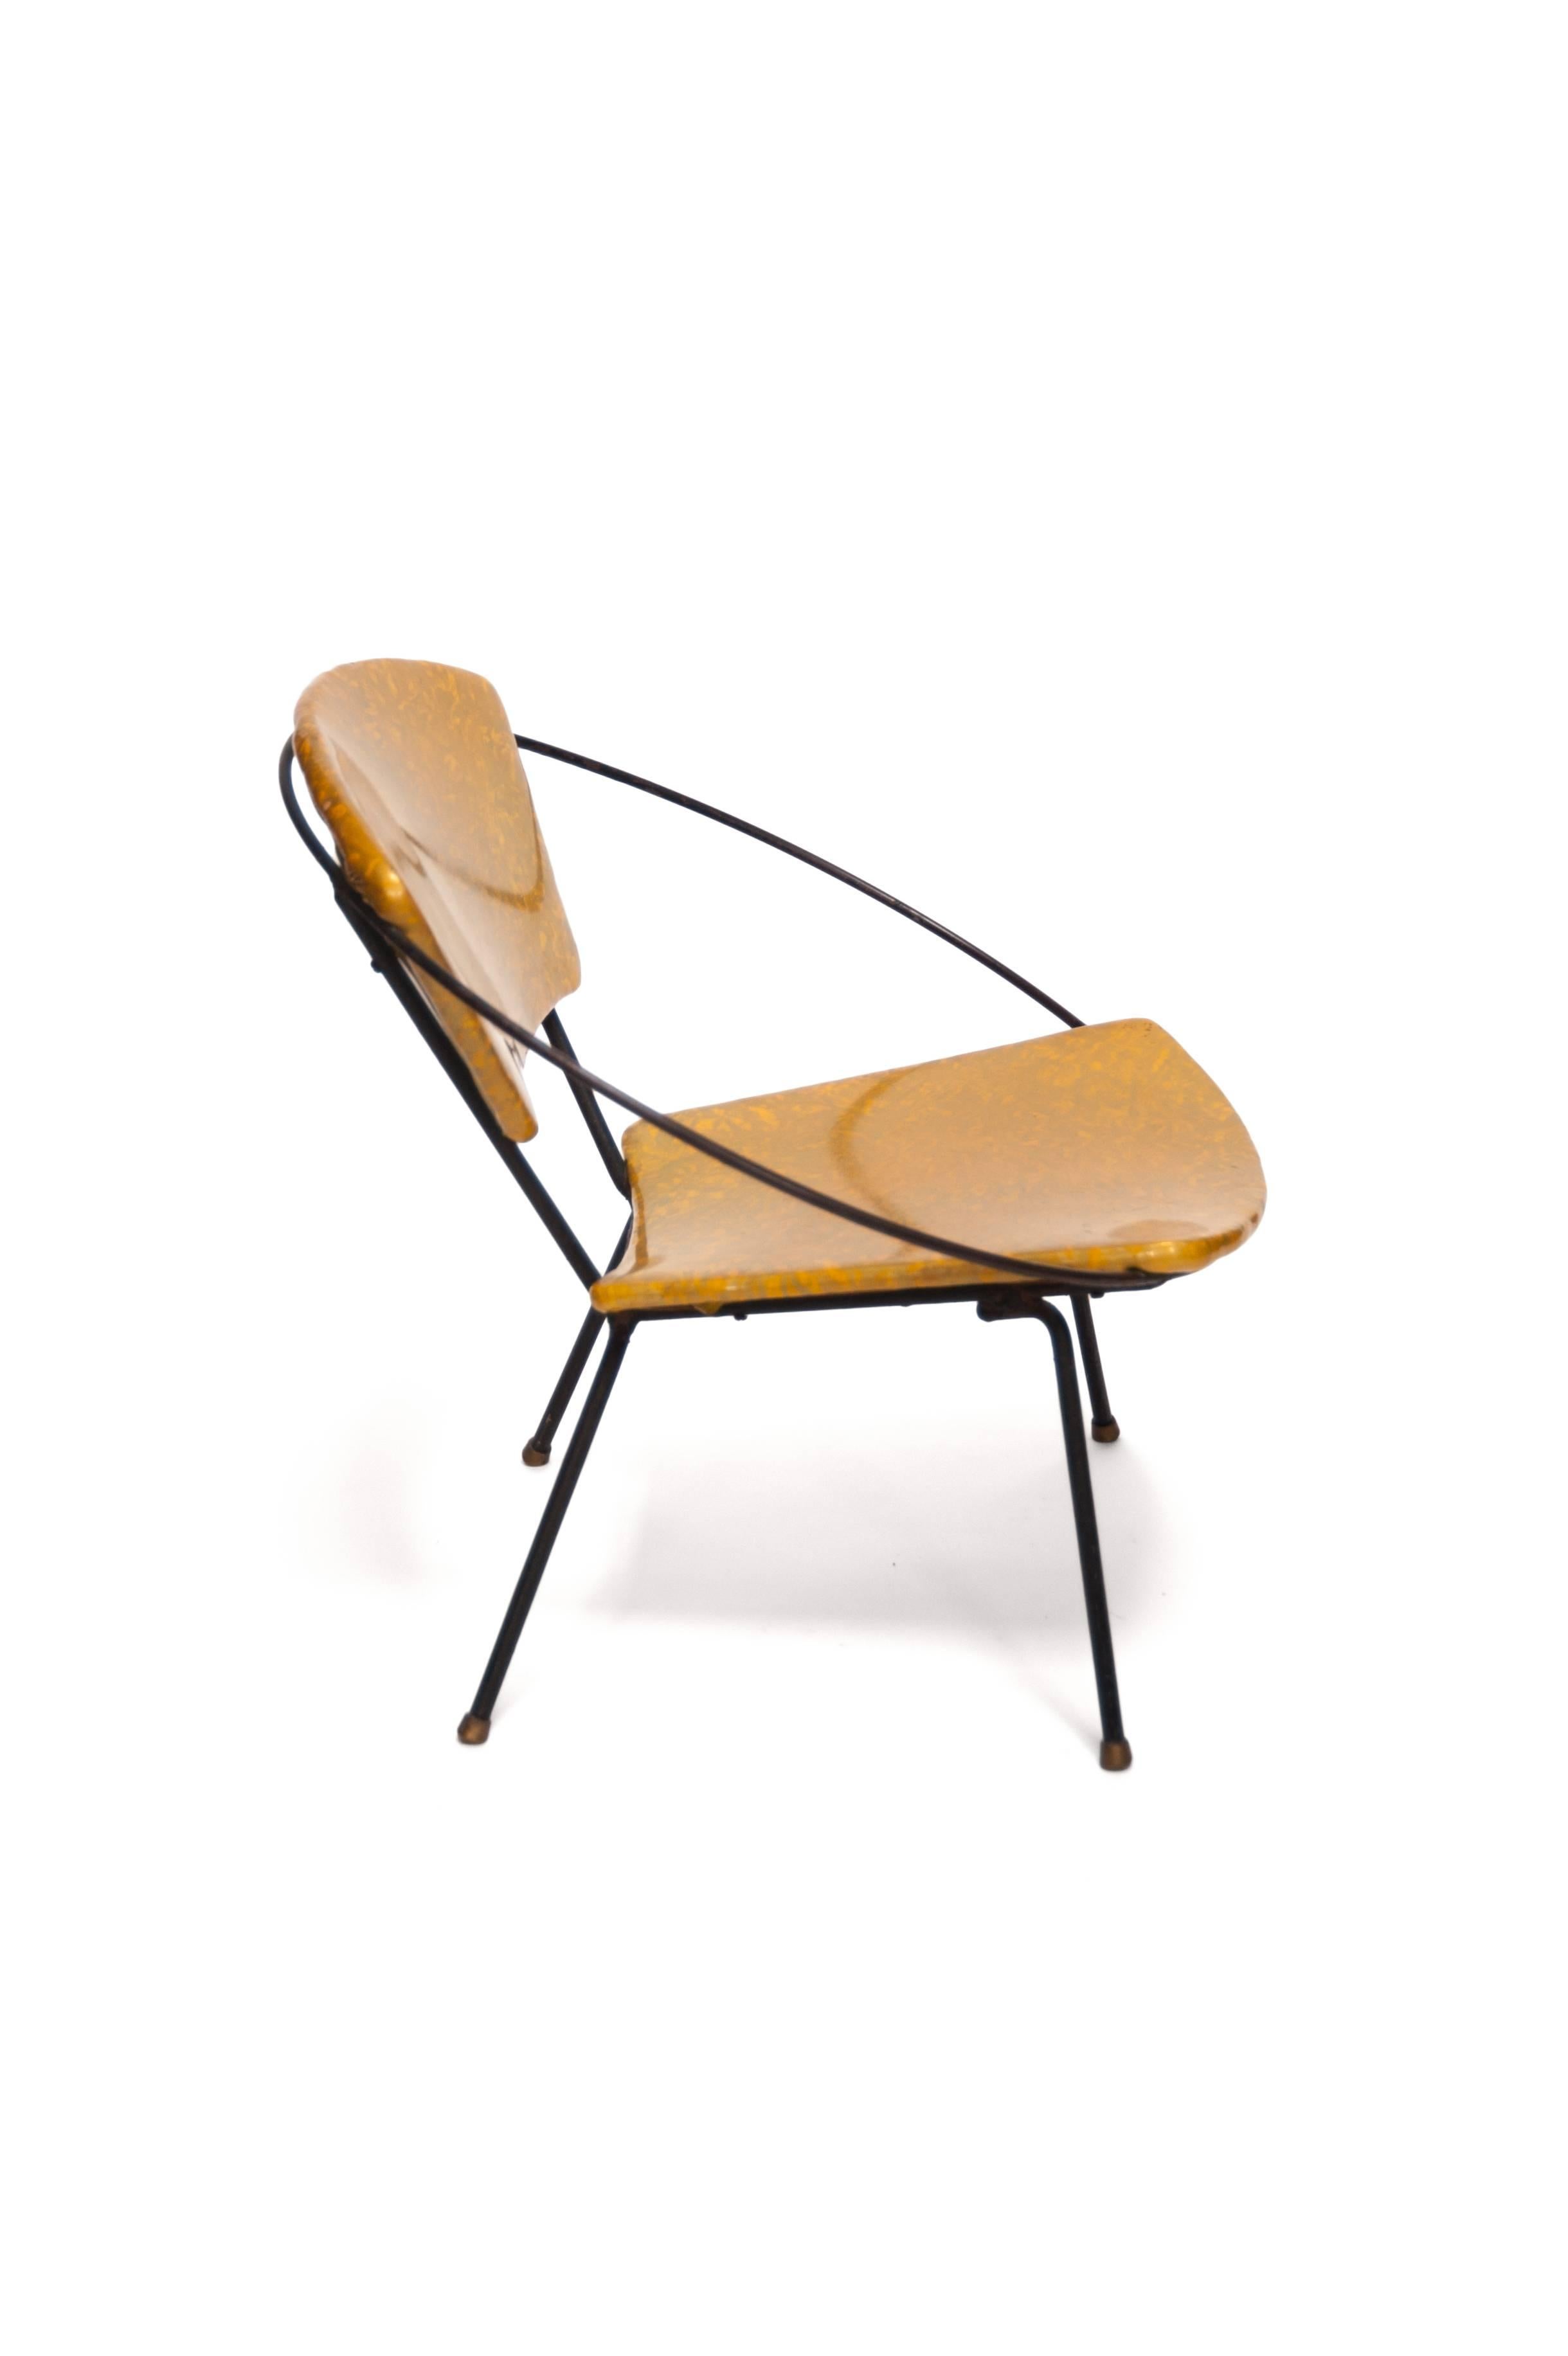 American Vinyl Circle Child Chair, Designer Unknown, USA, 1950s For Sale